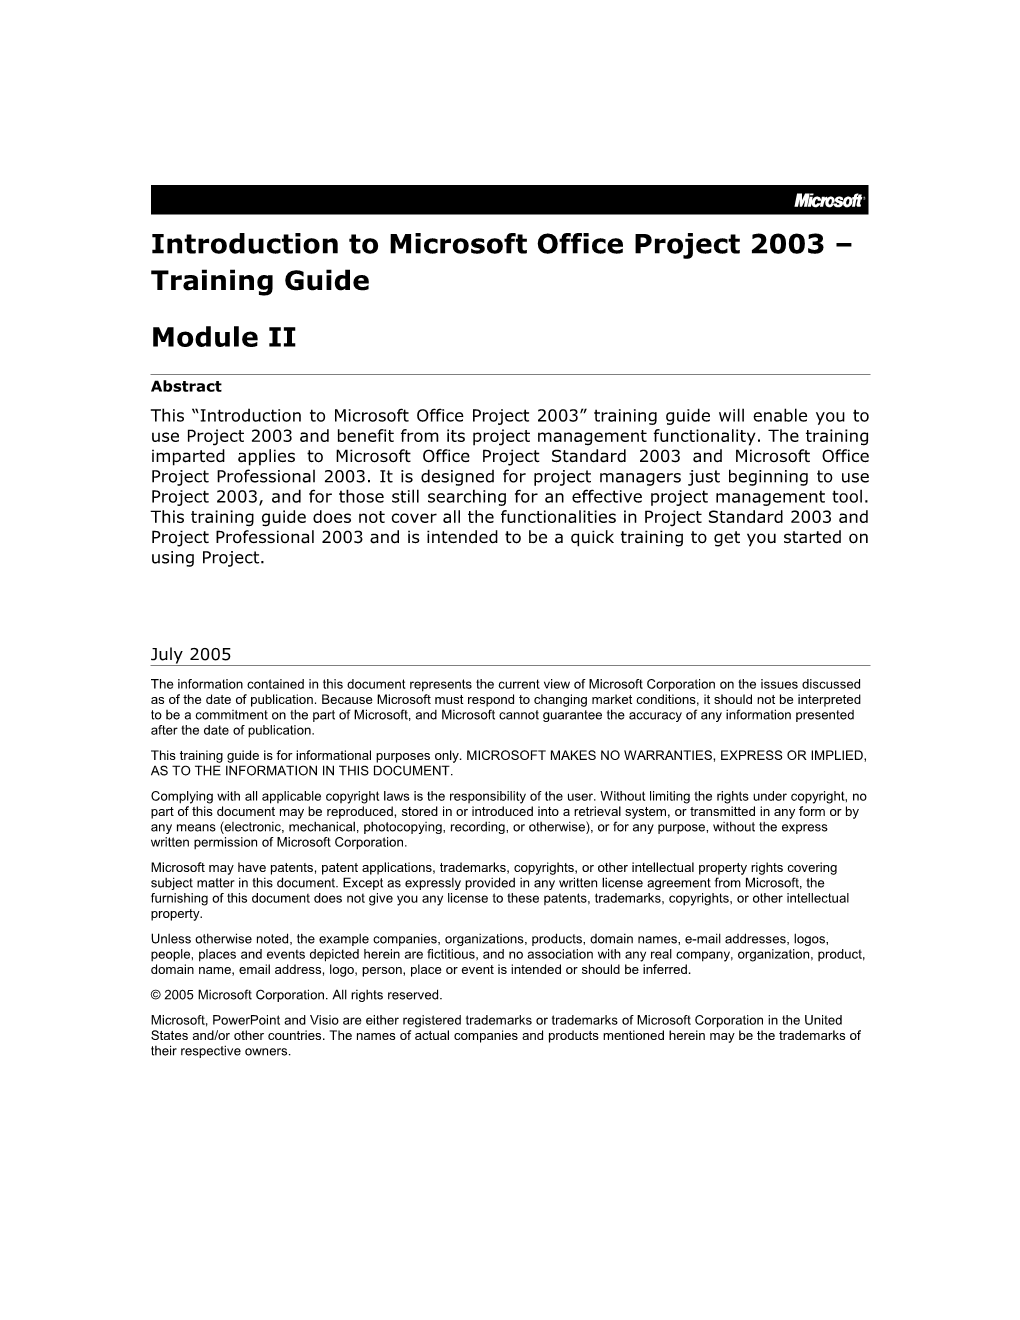 Introduction to Microsoft Office Project 2003 Training Guide